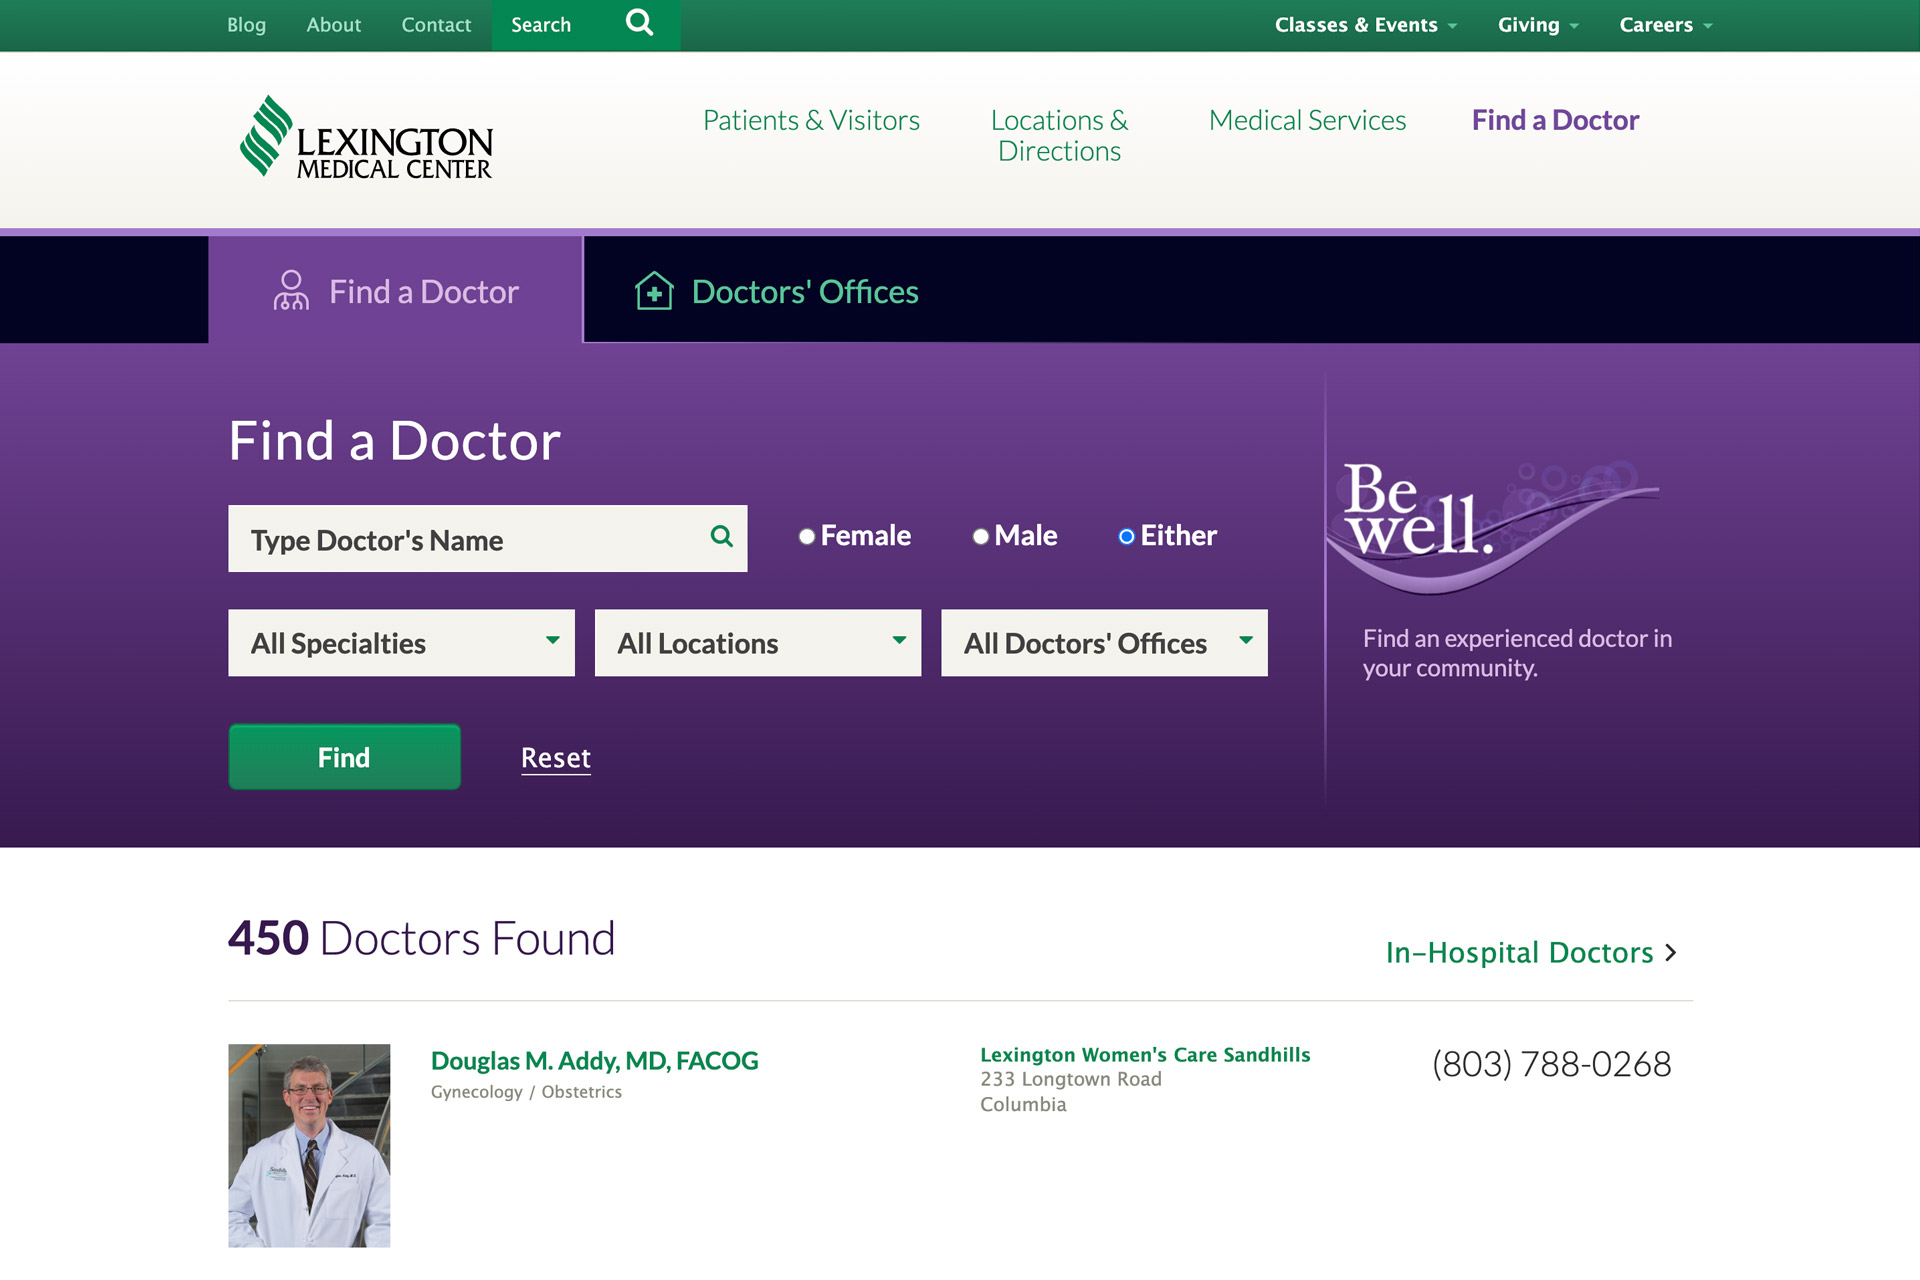 Lexmed.com Find a Doctor page, showing tab options for finding a doctor (active) or doctors' offices, and 5 simple search options. Below, the top of the search results show a doctor photo, name, address, and number.